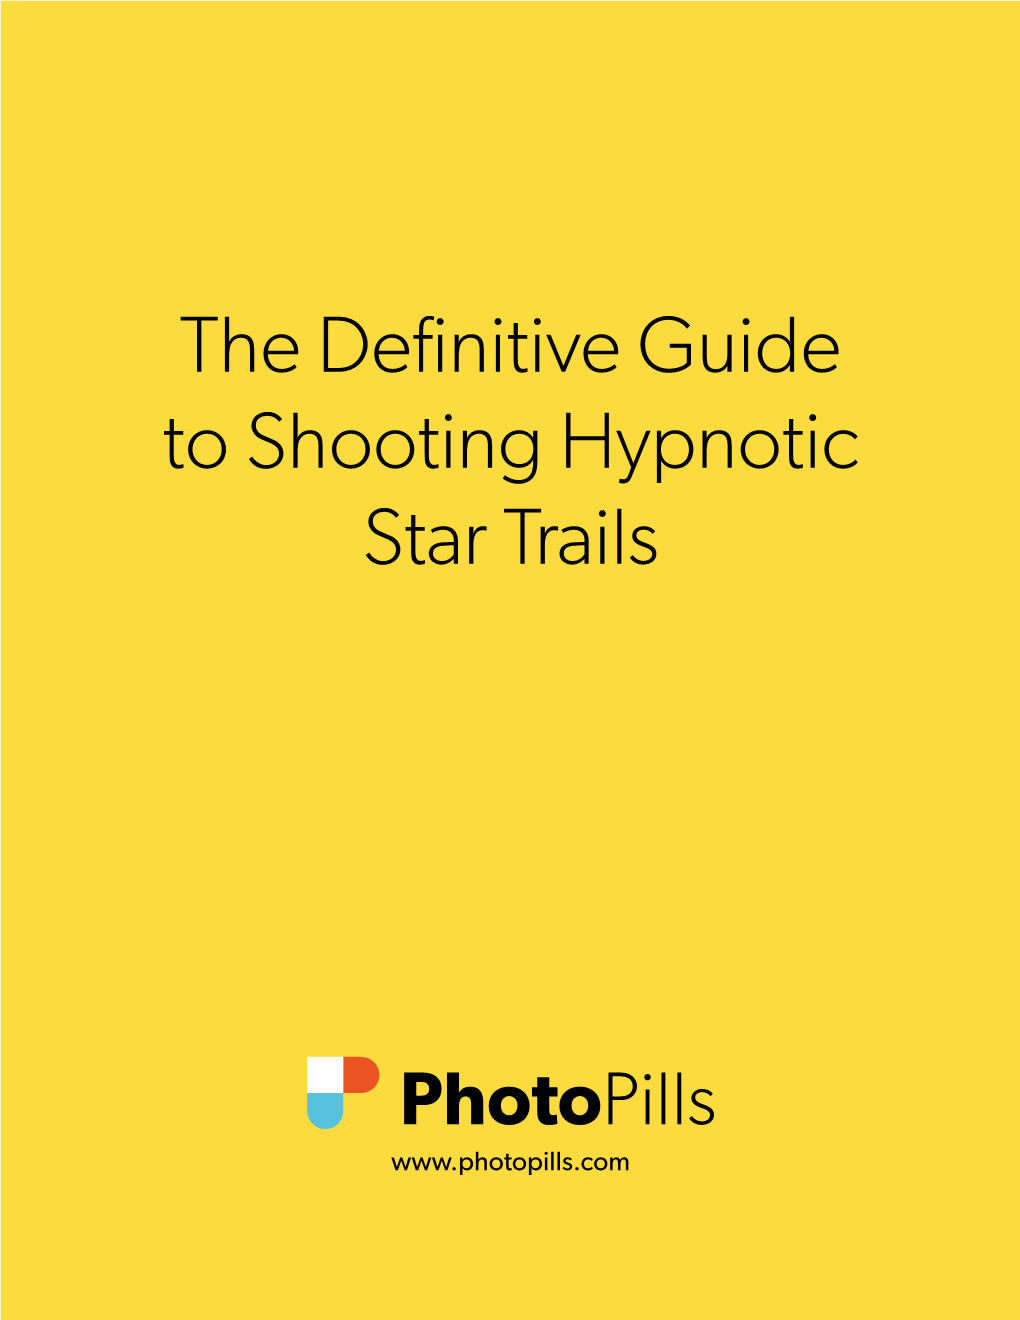 The Definitive Guide to Shooting Hypnotic Star Trails